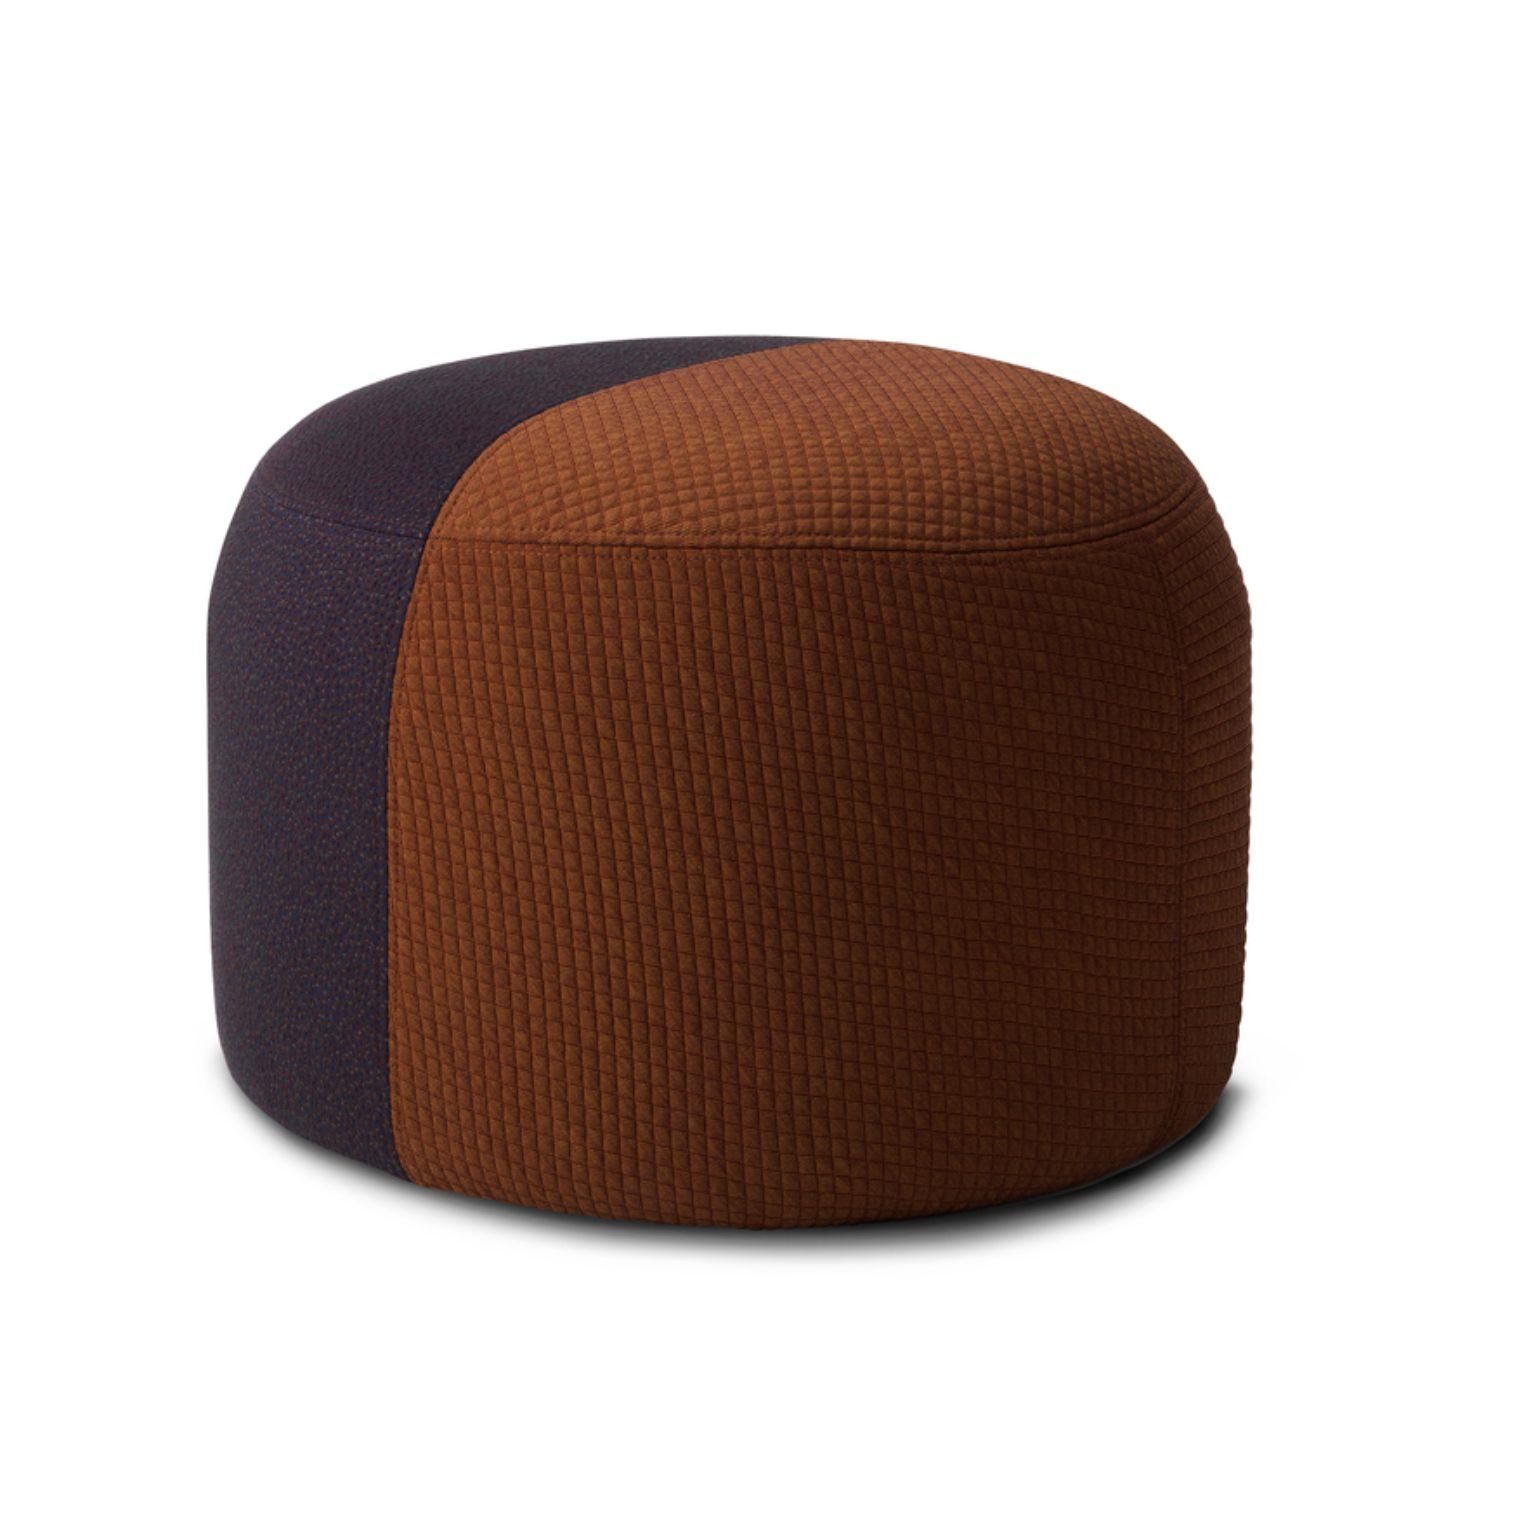 Dainty Pouf Mosaic sprinkles rusty eggplant by Warm Nordic
Dimensions: D55 x H 39 cm
Material: Textile upholstery, Wooden frame, foam.
Weight: 9.5 kg
Also available in different colours and finishes. 

Sophisticated, two-coloured pouf with